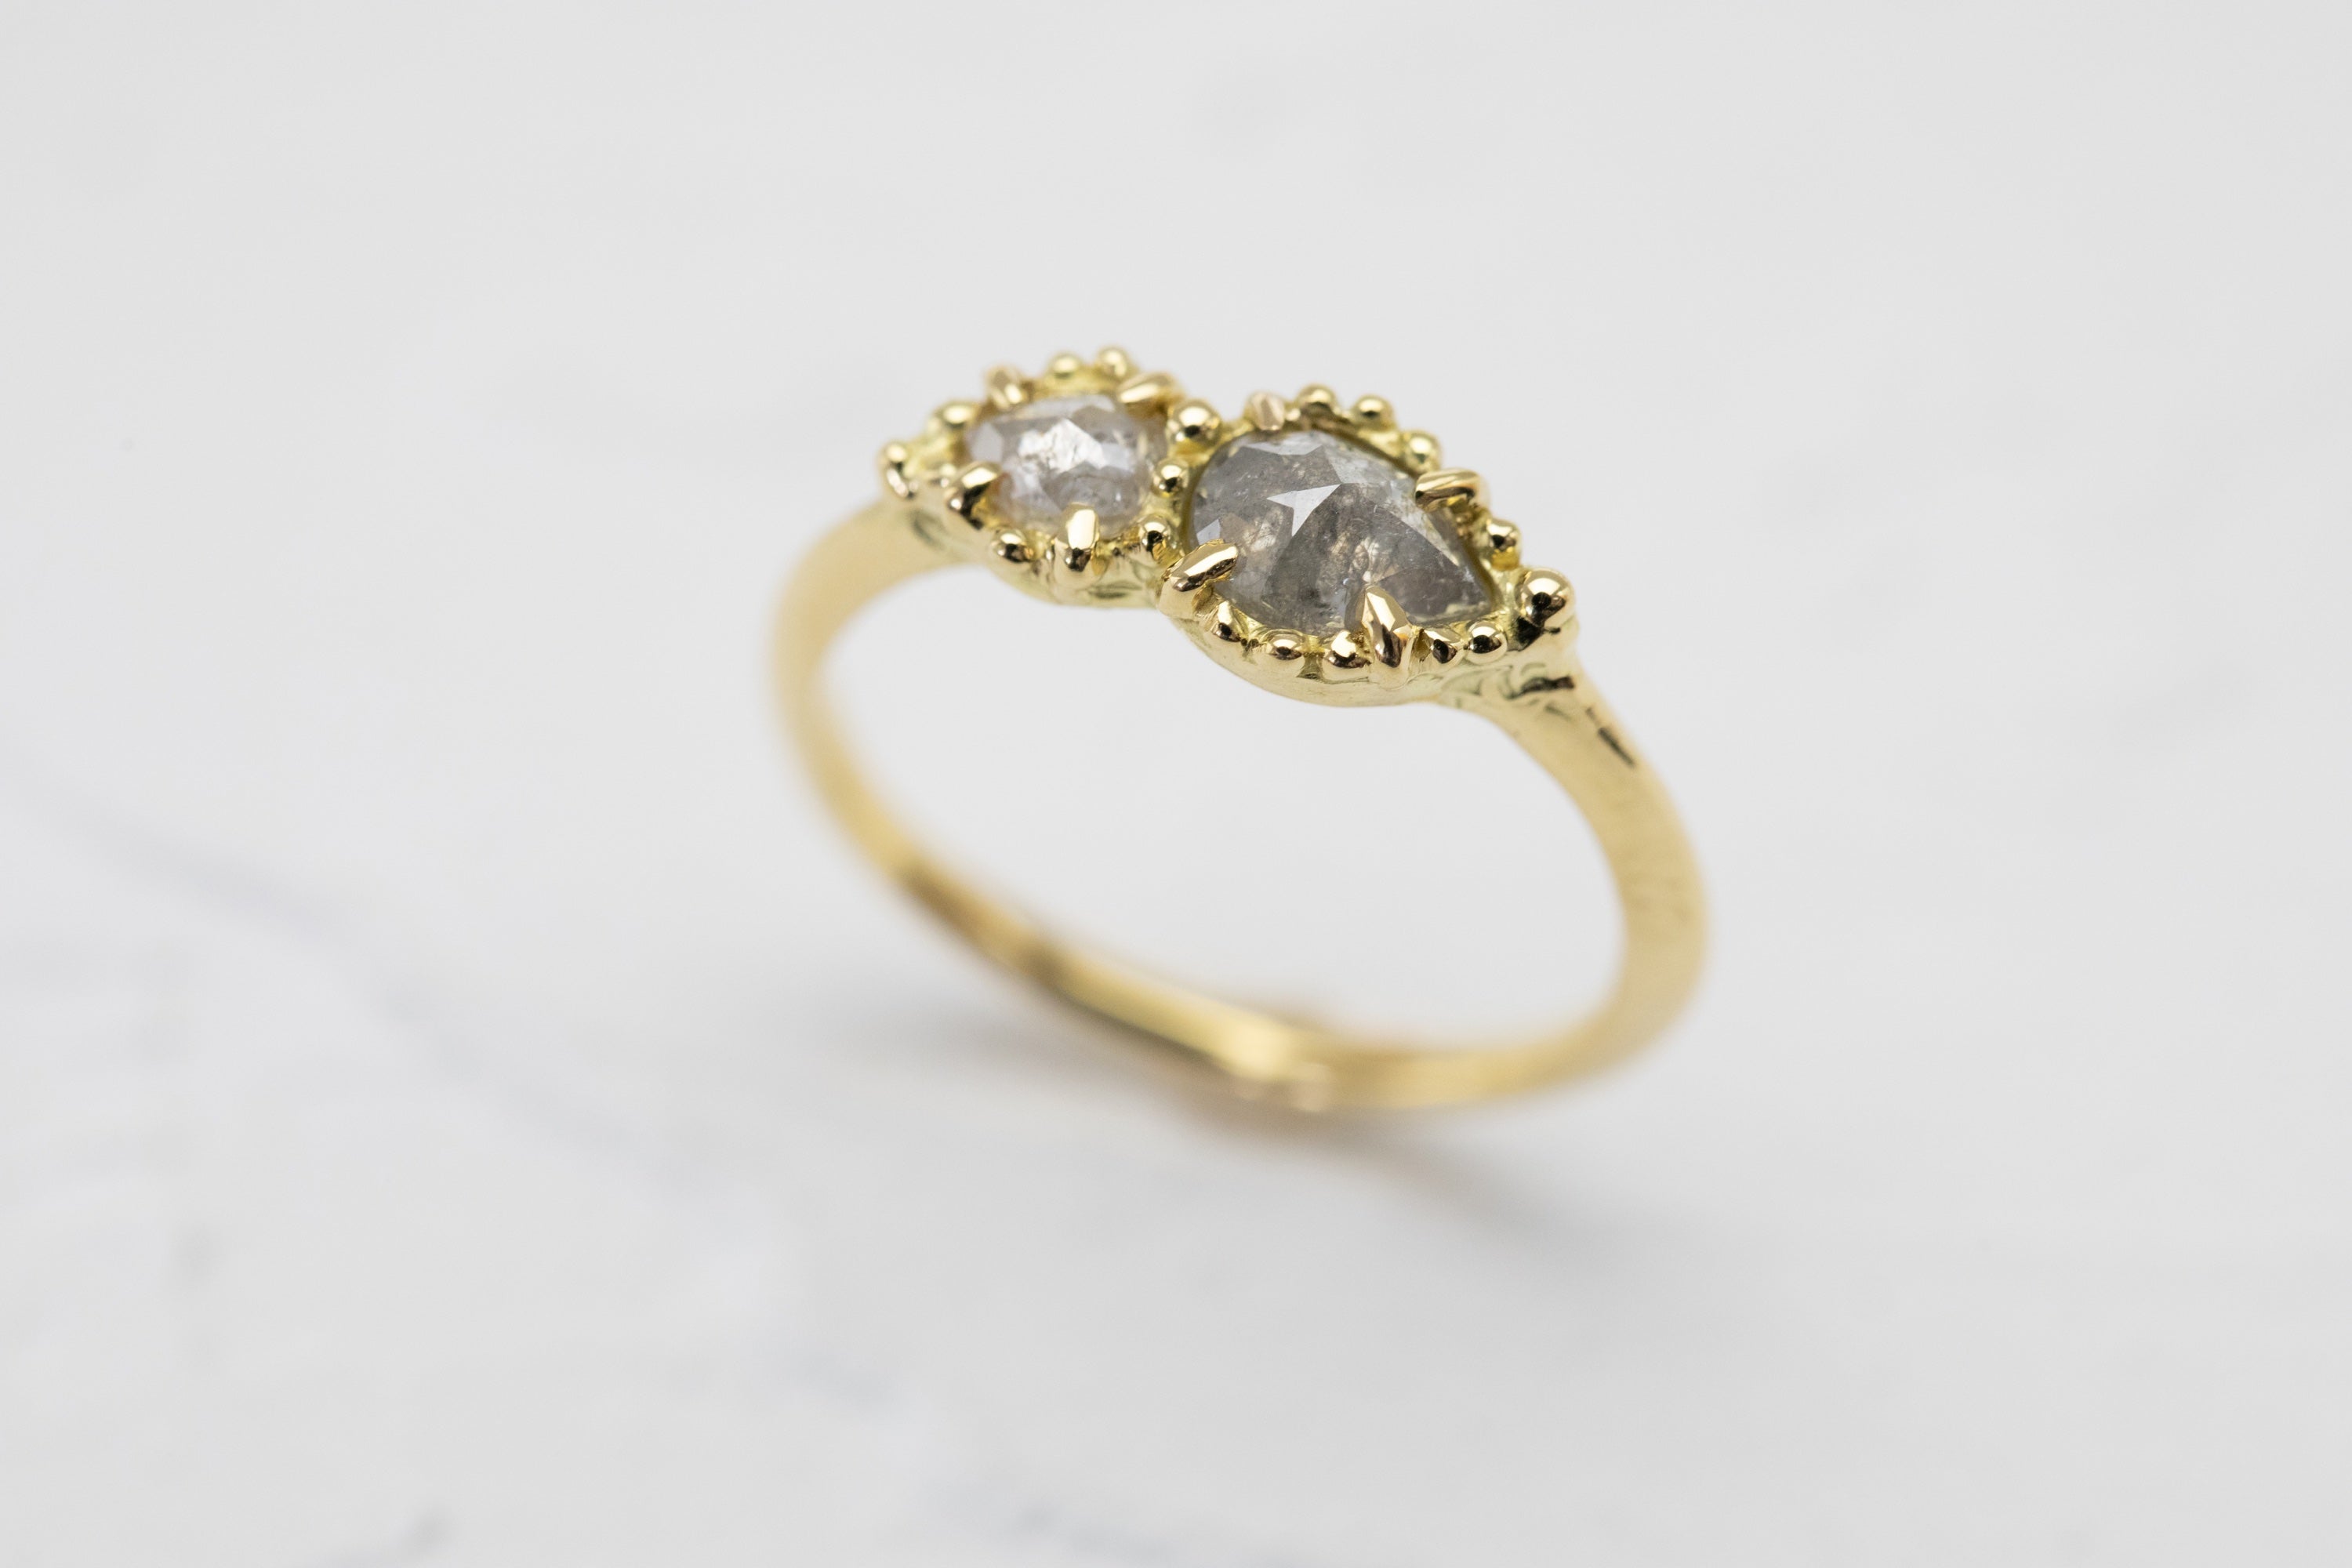 Gray and White Pear Shaped Rustic Diamond Ring (18k)